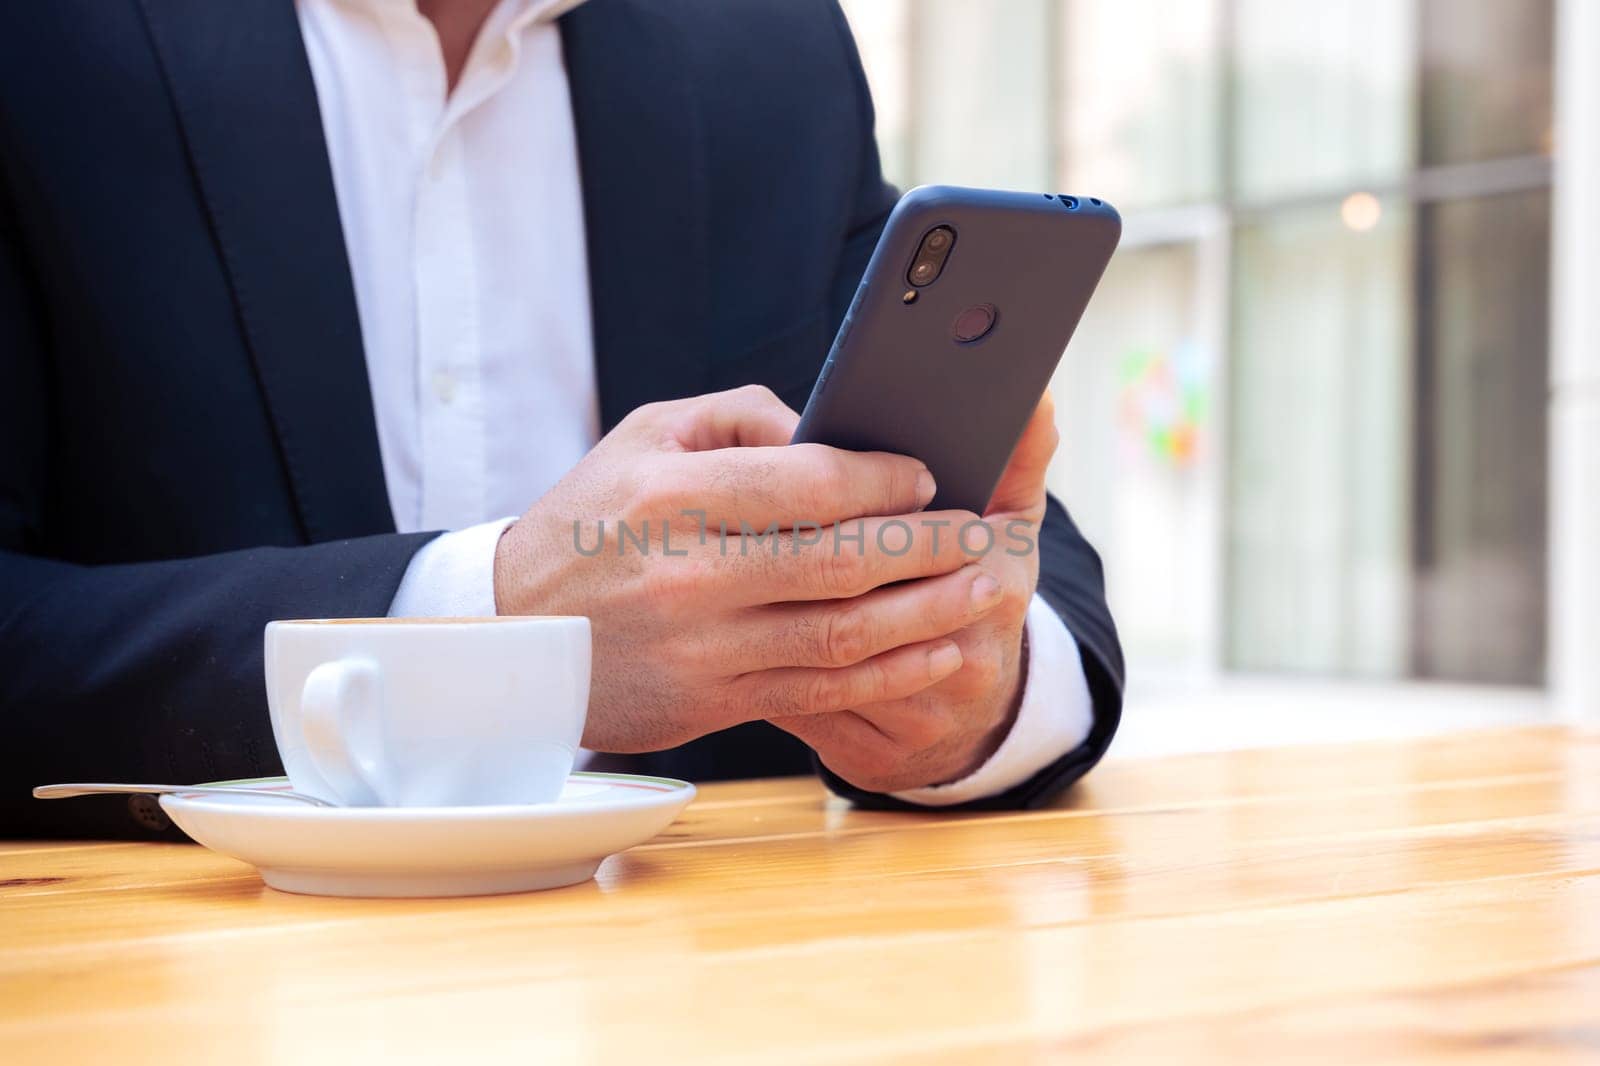 Satisfied with the results, the businessman sitting outside the office building, a mature boss holds a phone and drinks coffee, writes messages and reads news online, using an app.